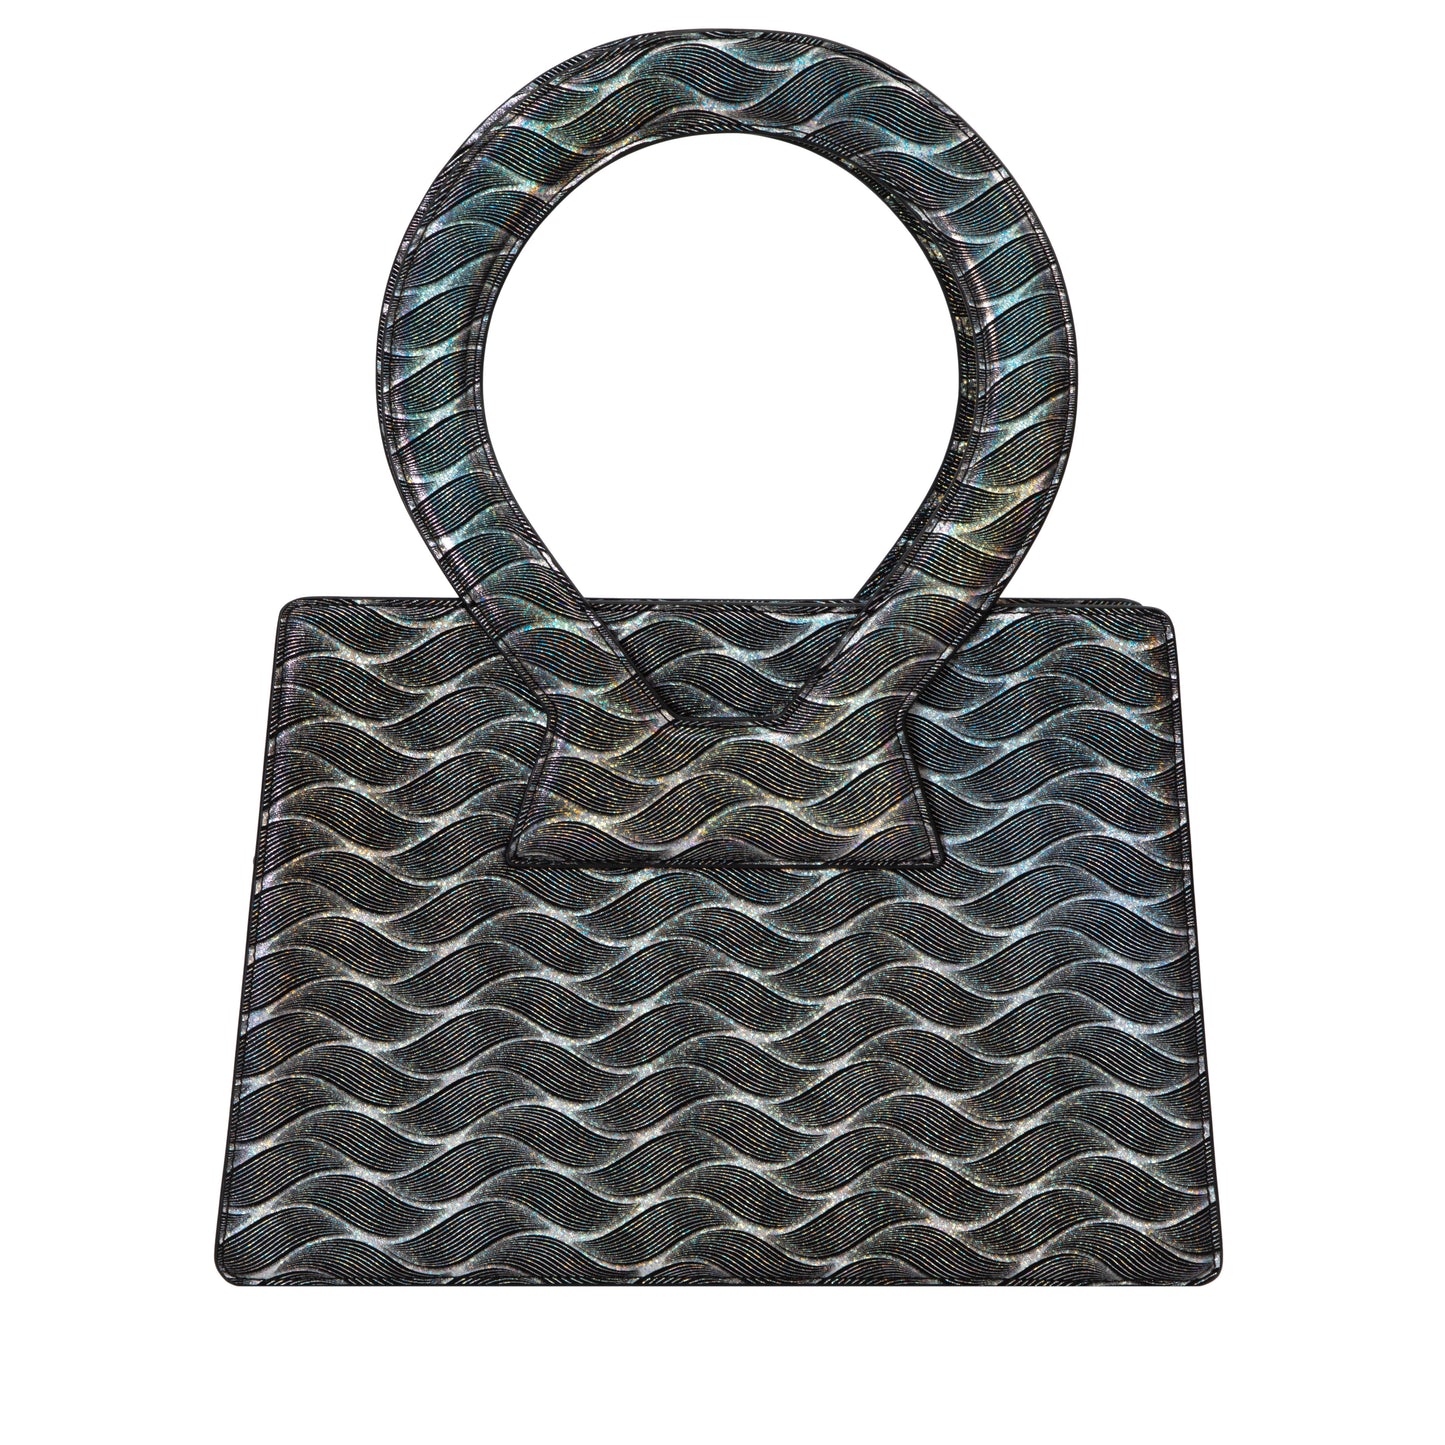 IRIDESCENT WAVE LARGE ANA TOTE